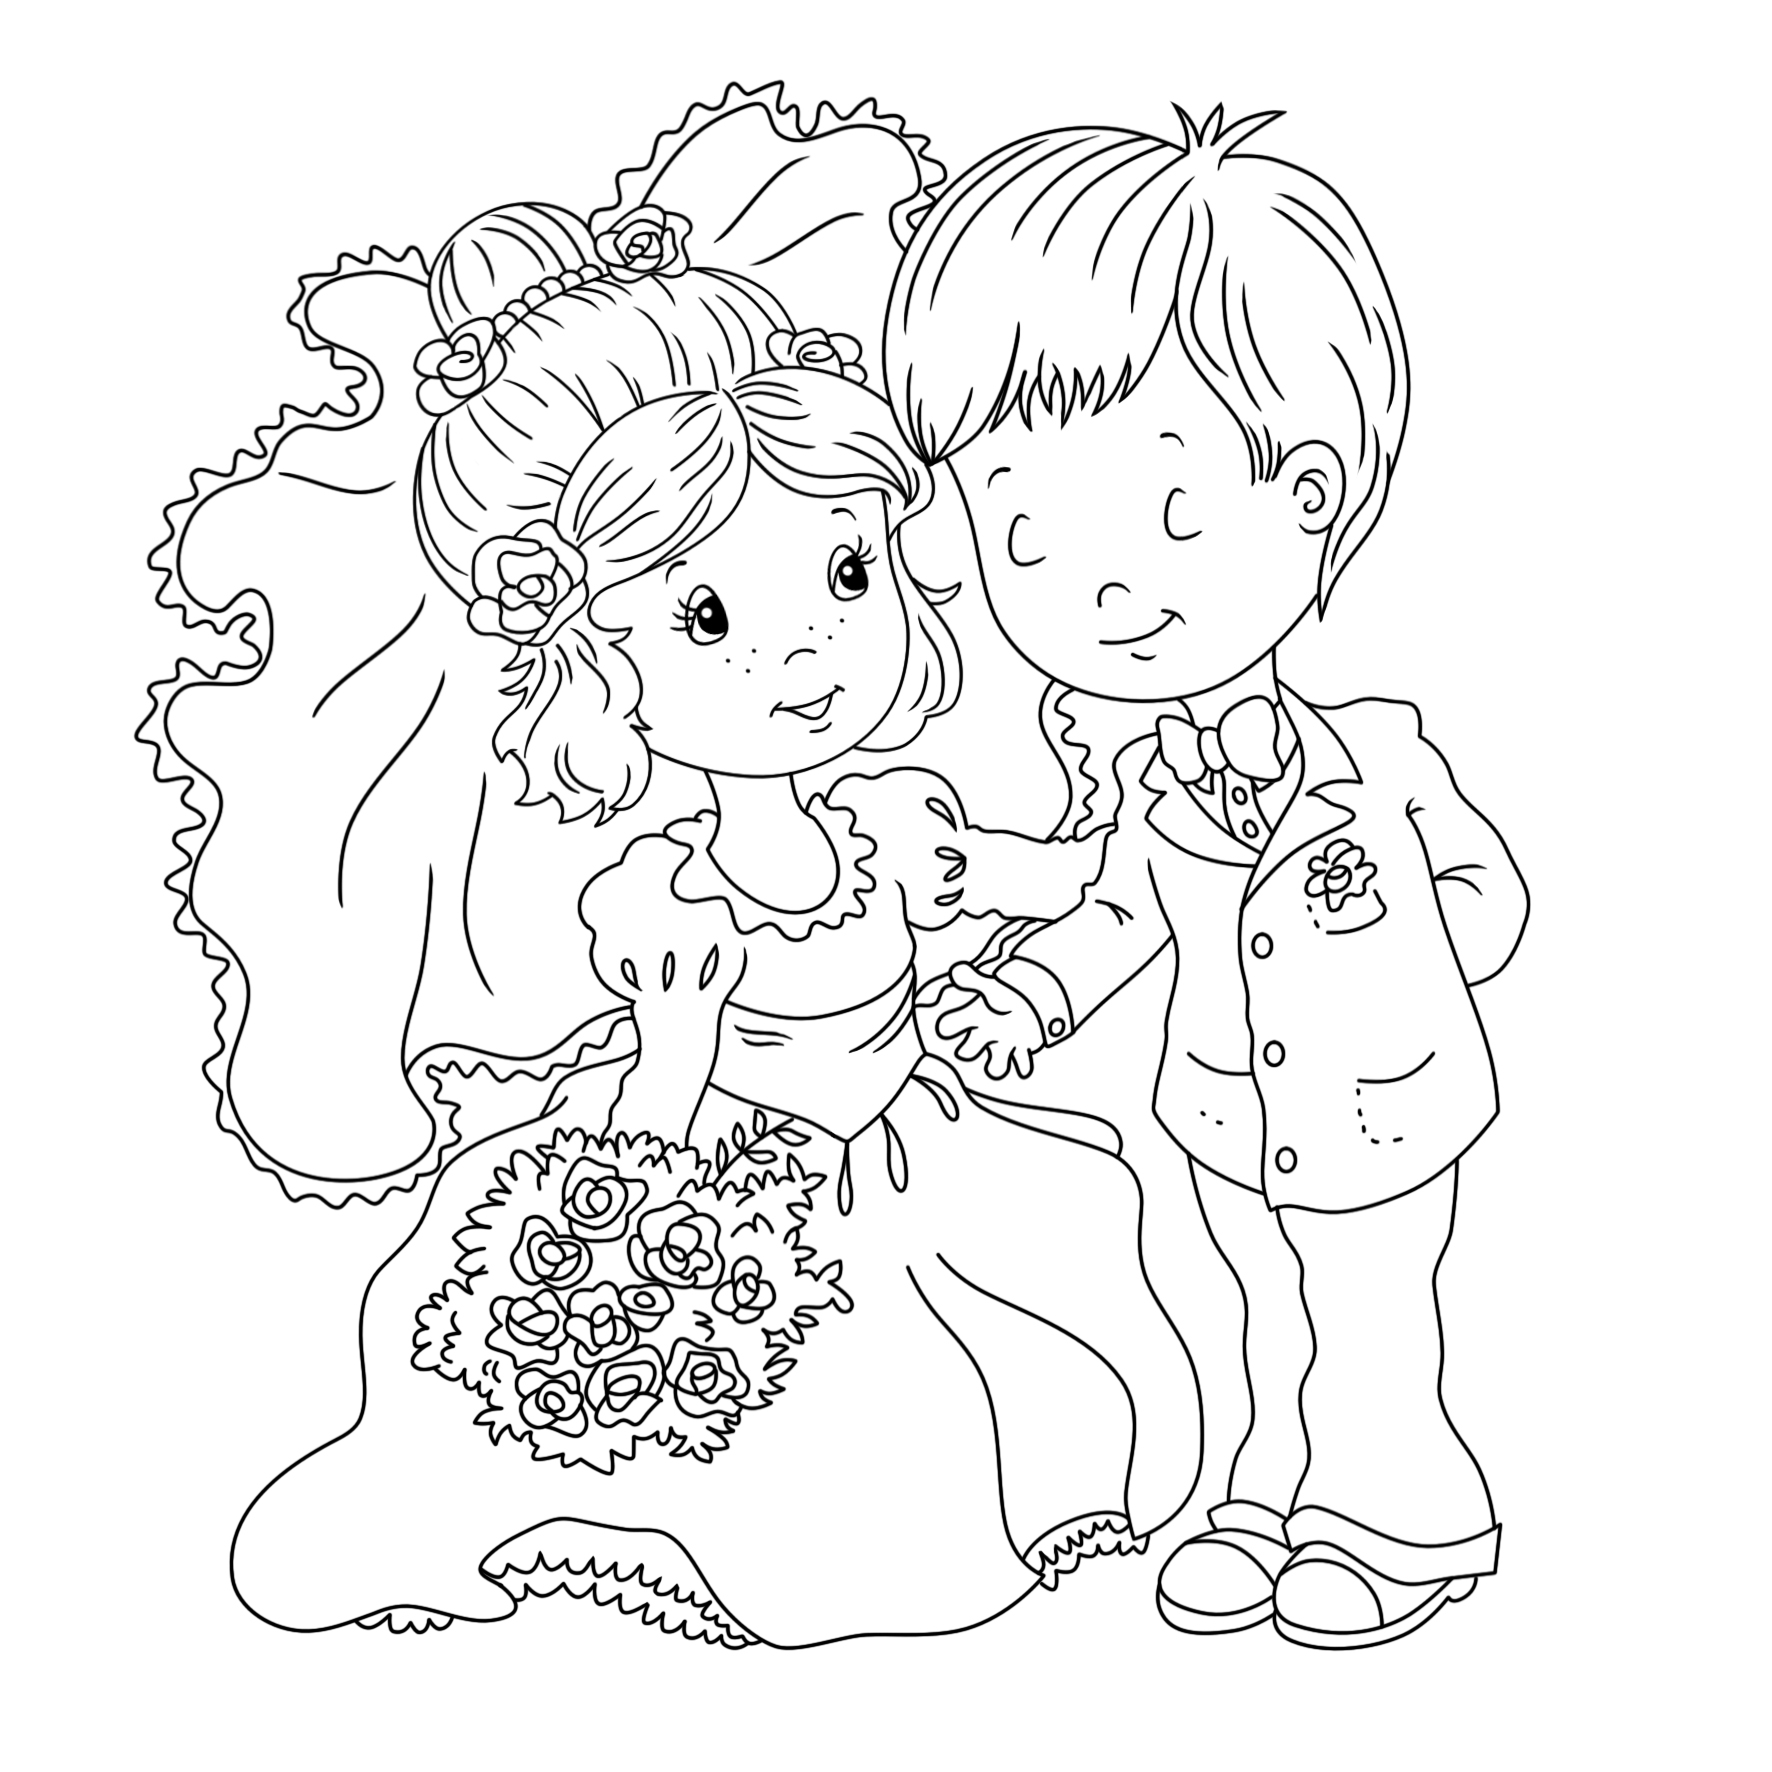 Wedding Coloring Pages Best Coloring Pages For Kids